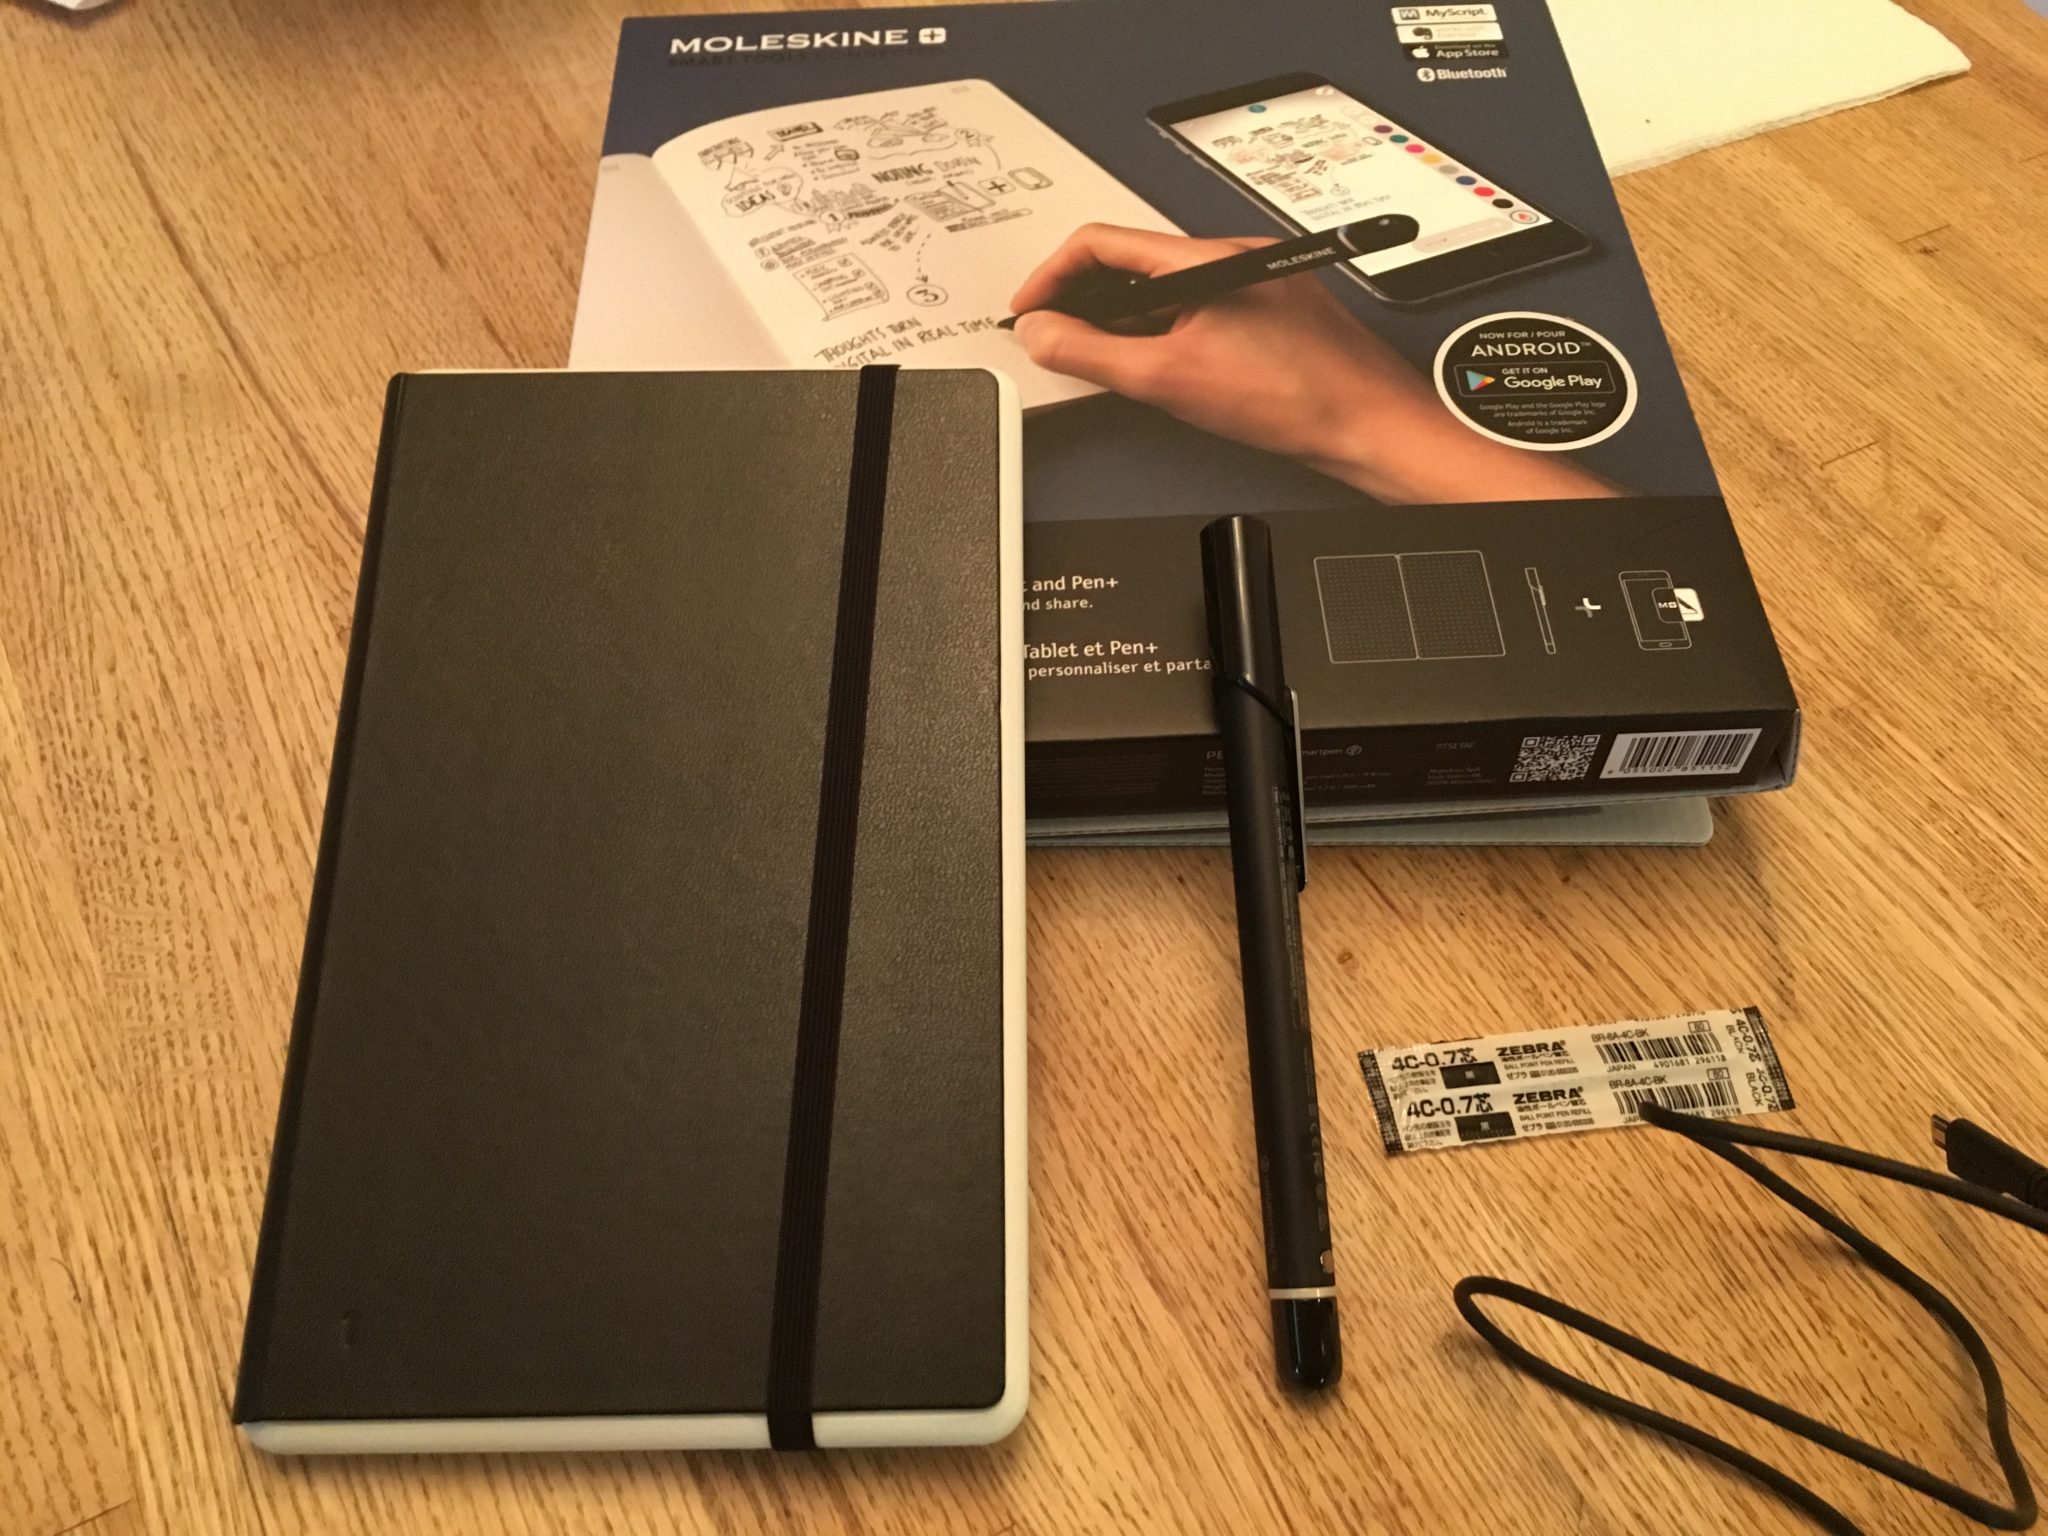 Moleskin Smart Writing Set & How it Connects to Evernote : A